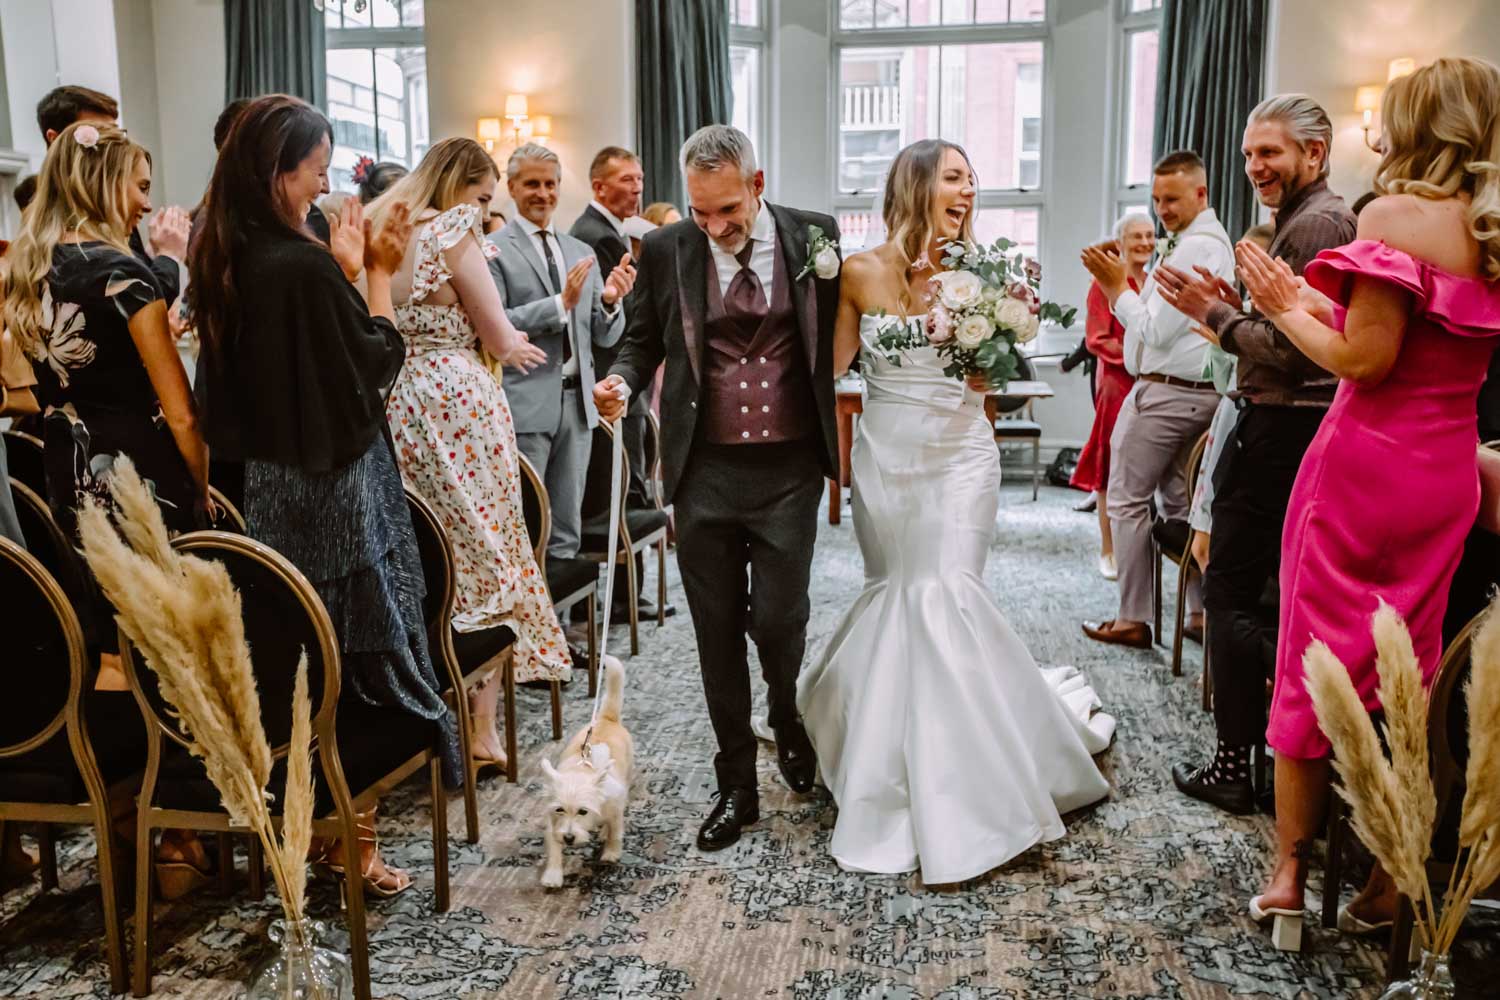 The freshly married couple joyfully walks down the aisle with their dog while guests clapping 